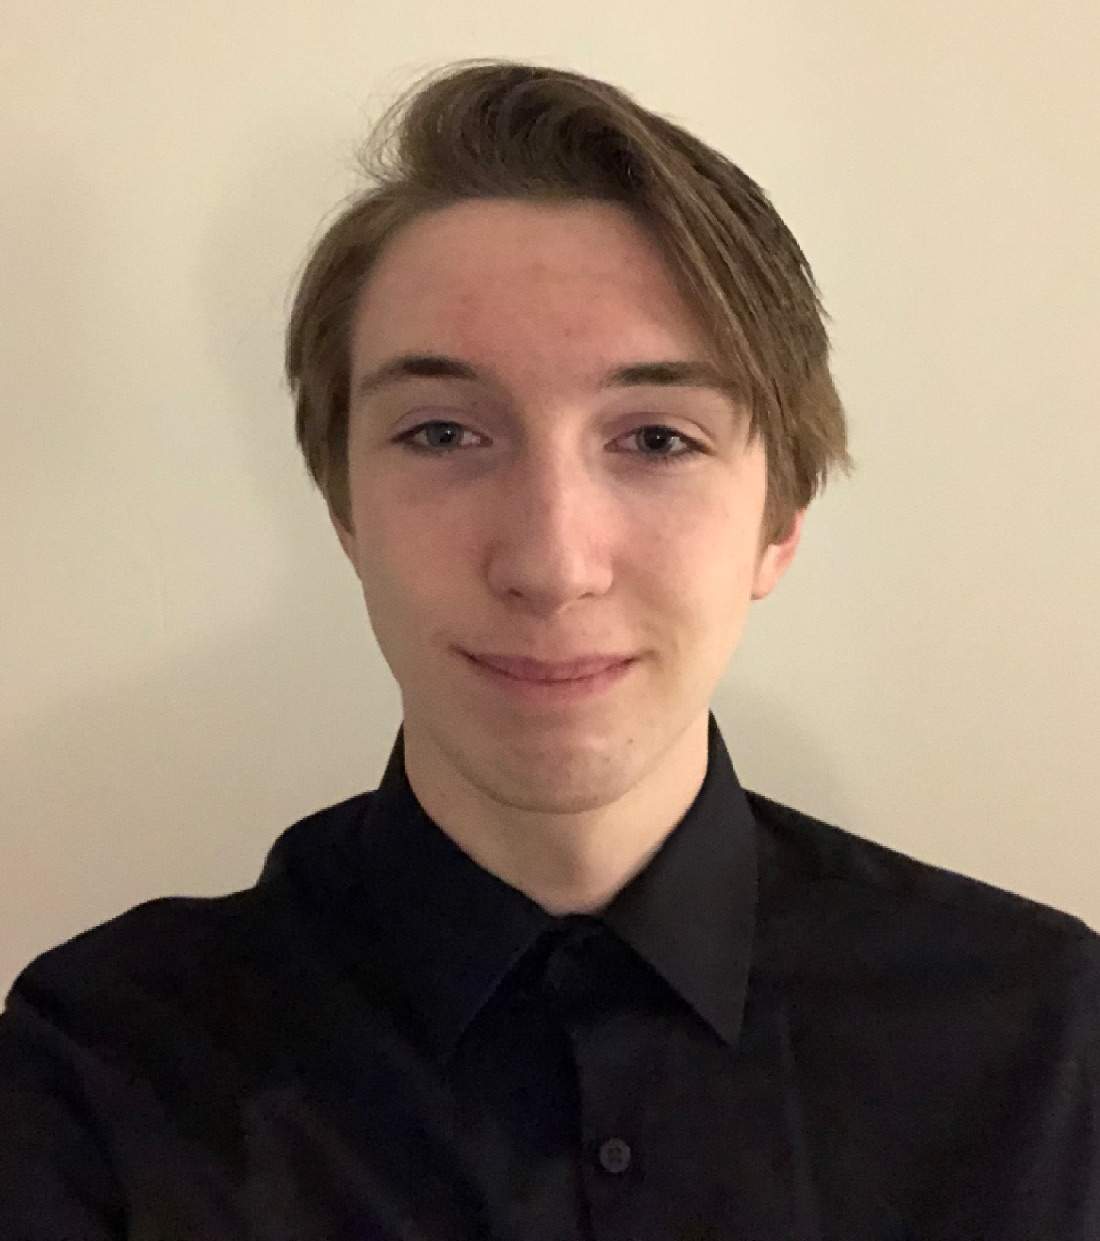 Chase Erlich, Music Comp composer